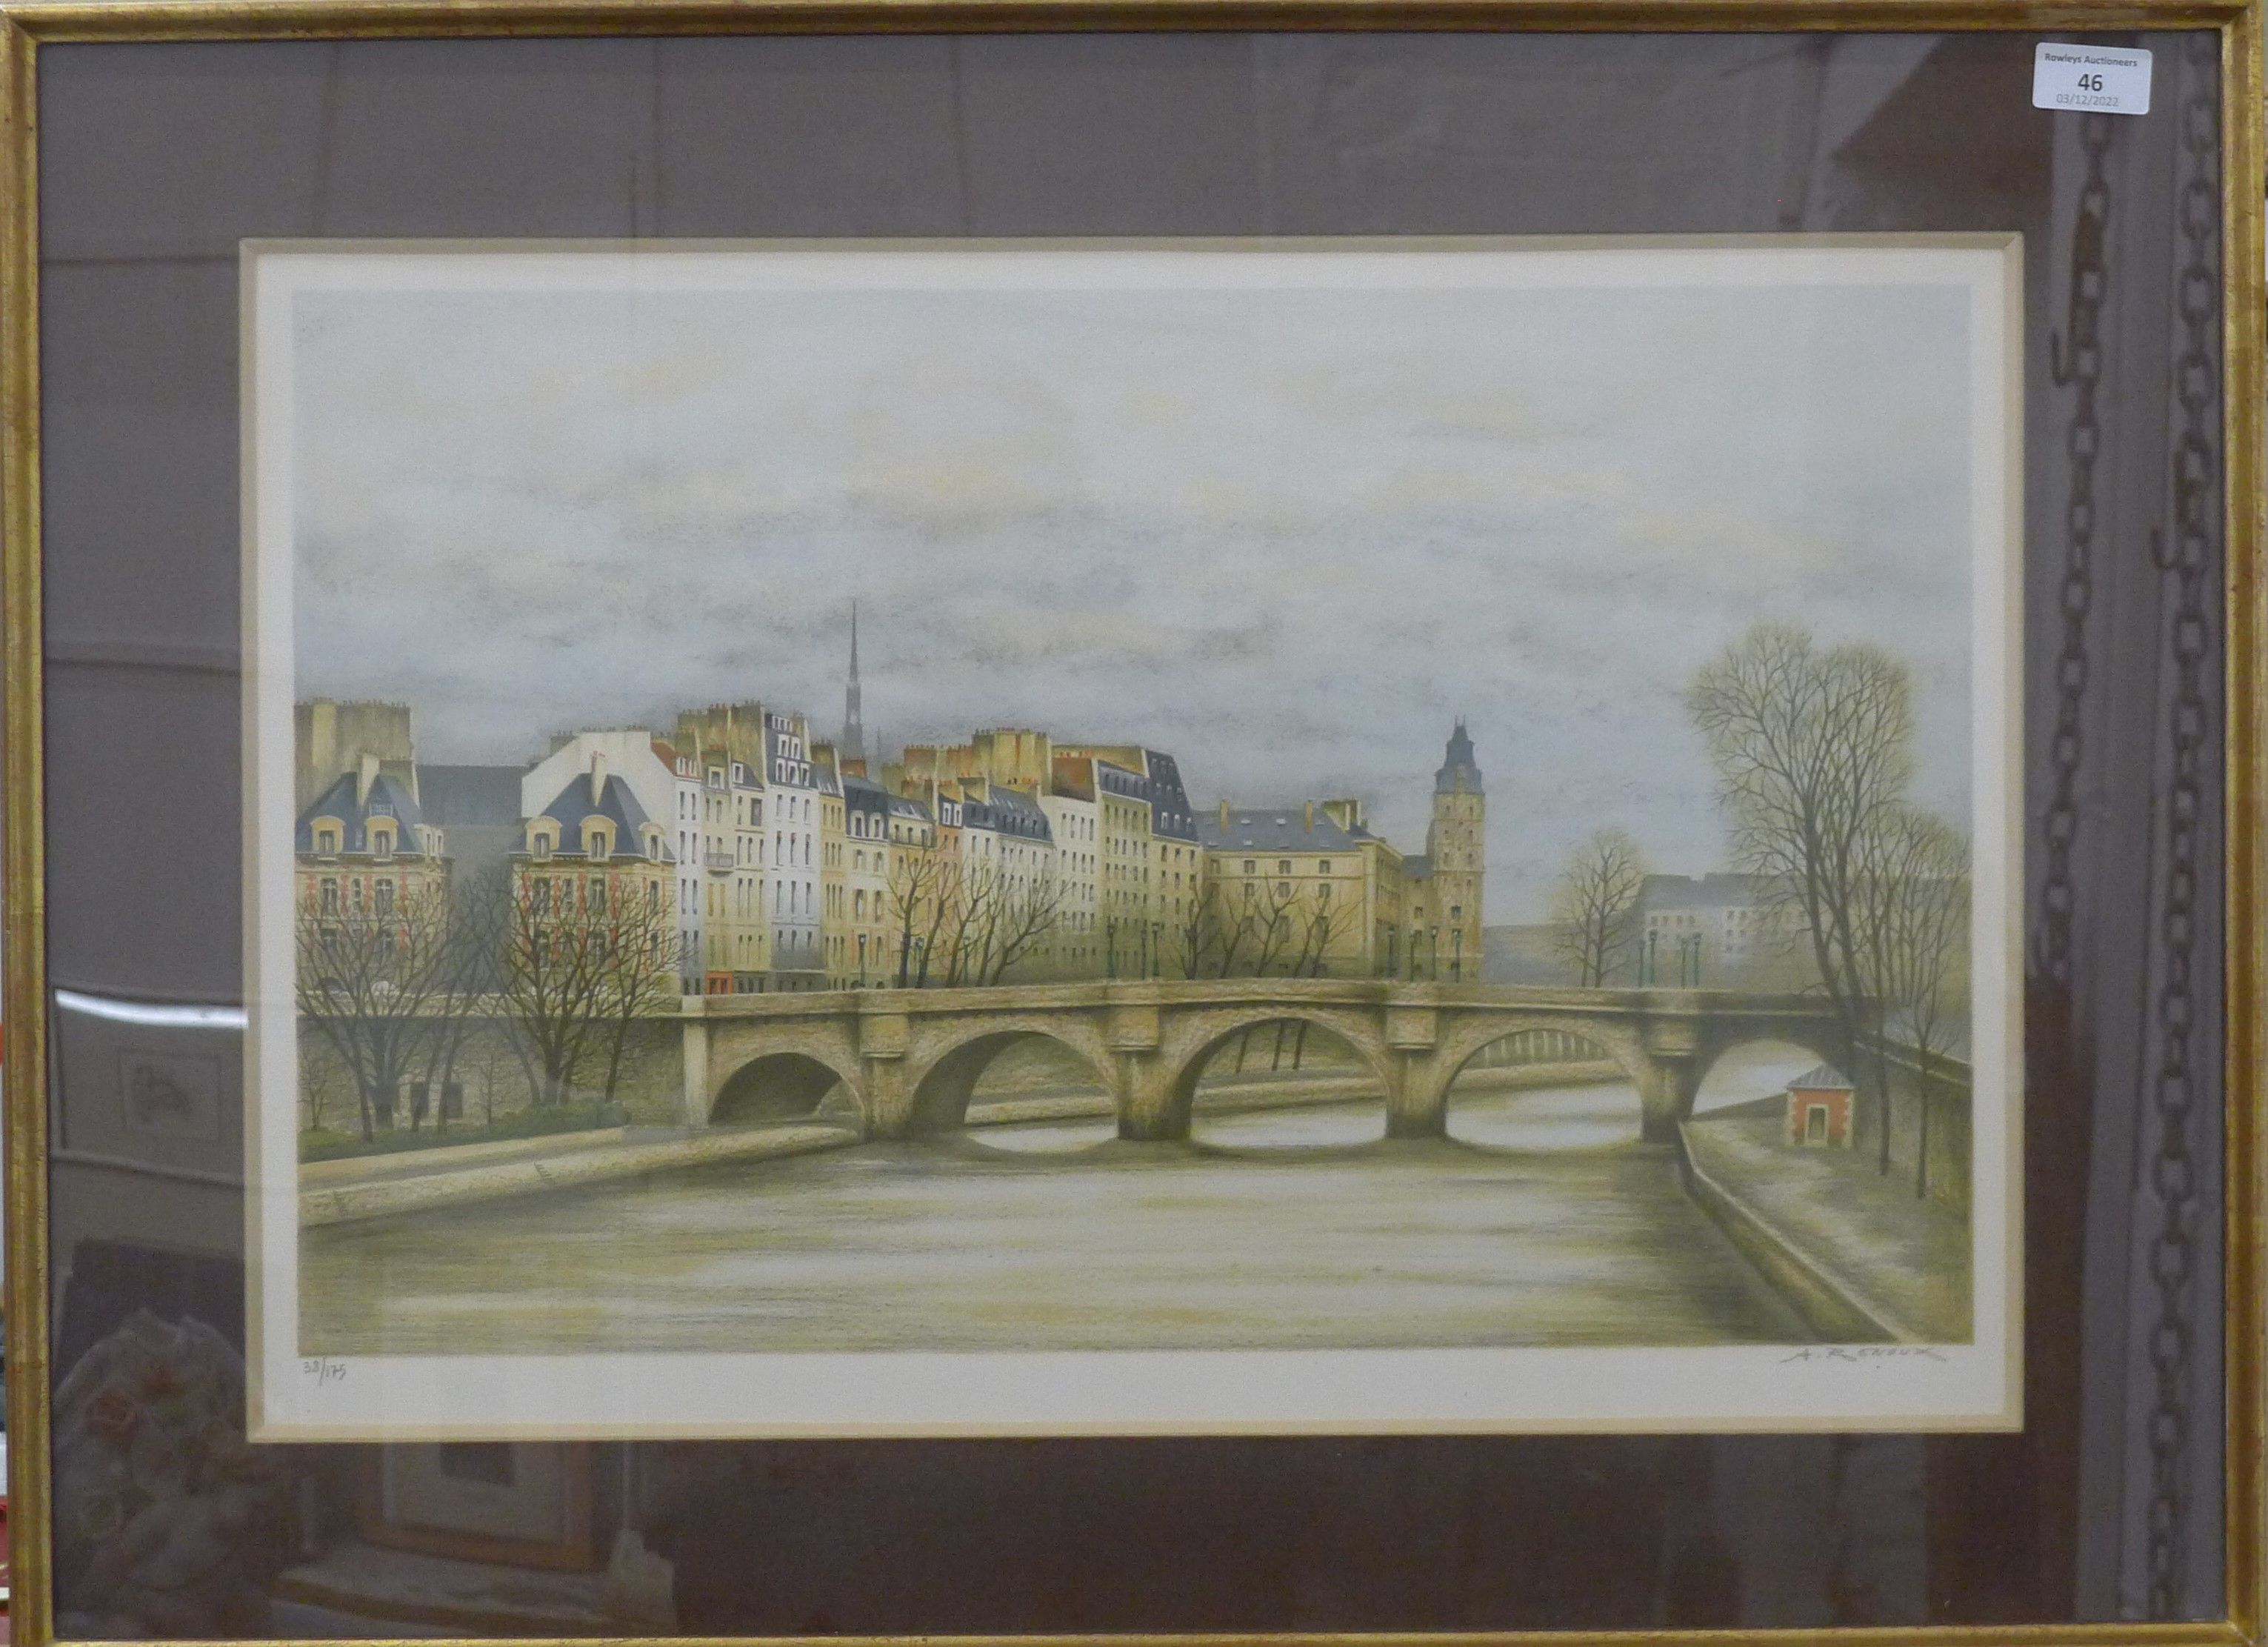 ANDRE RENOUX (1939-2002) French, Bridge over a River, limited edition lithograph, - Image 2 of 3